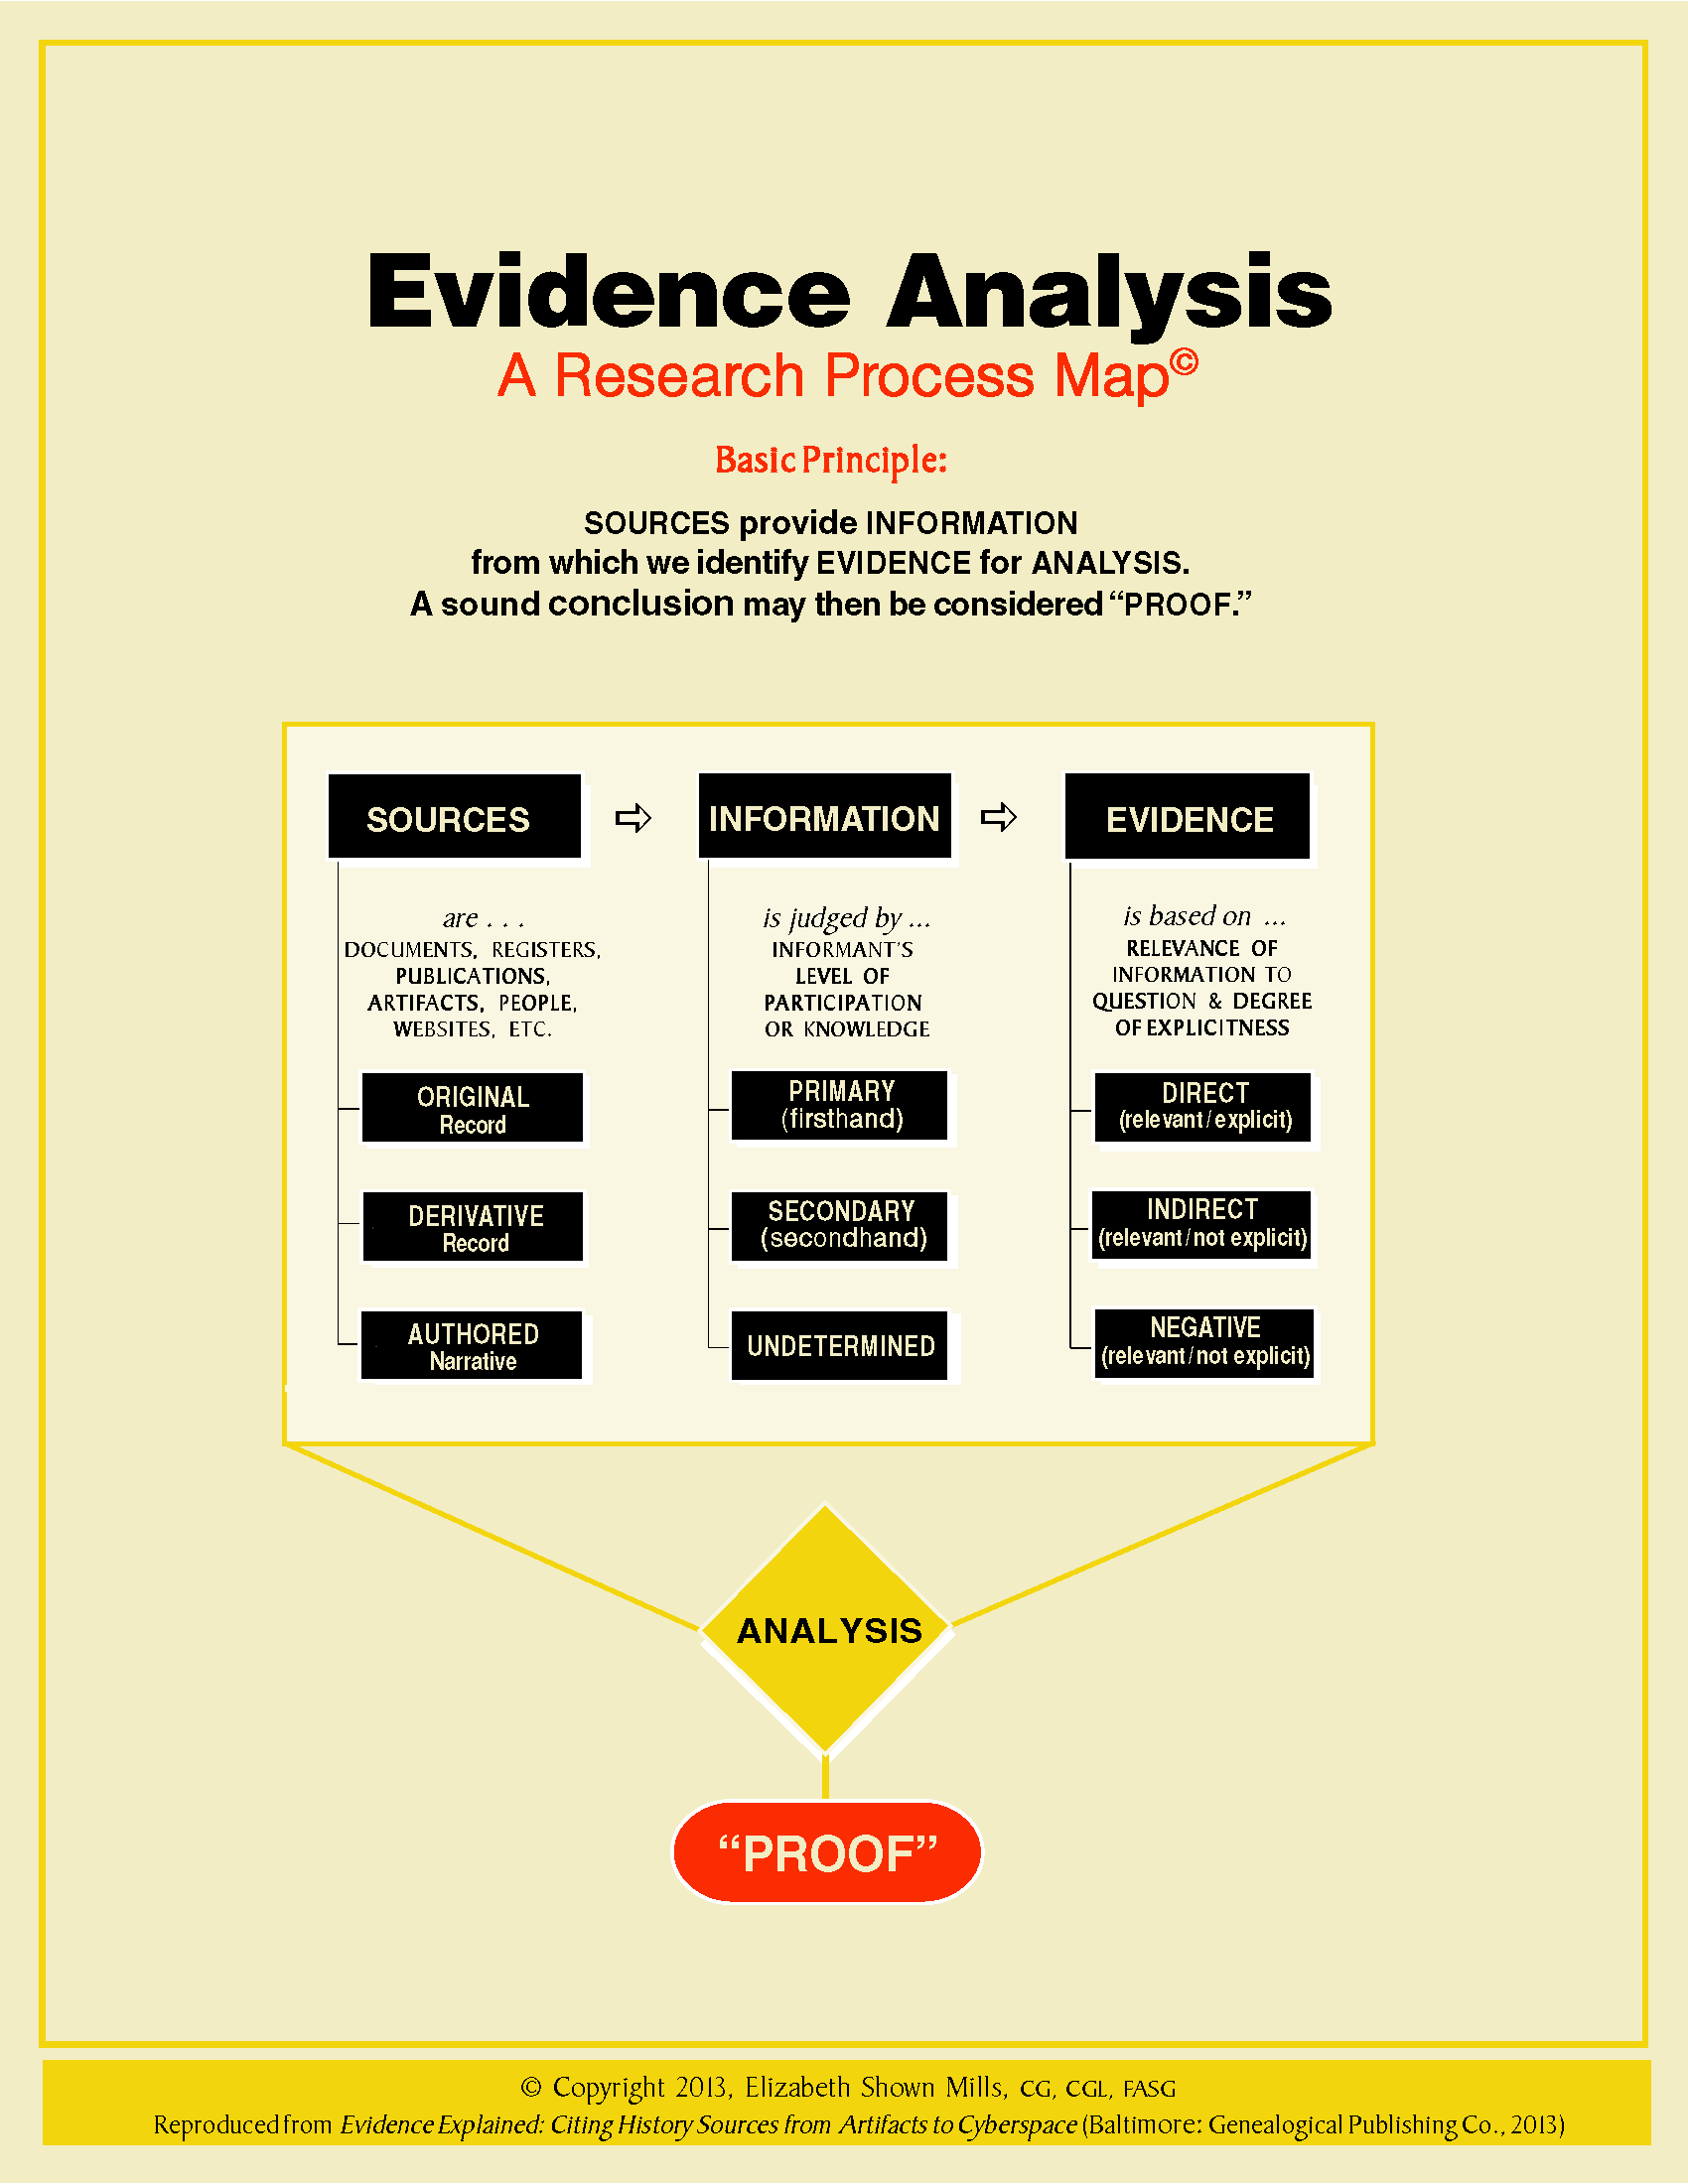 presentation of evidence means